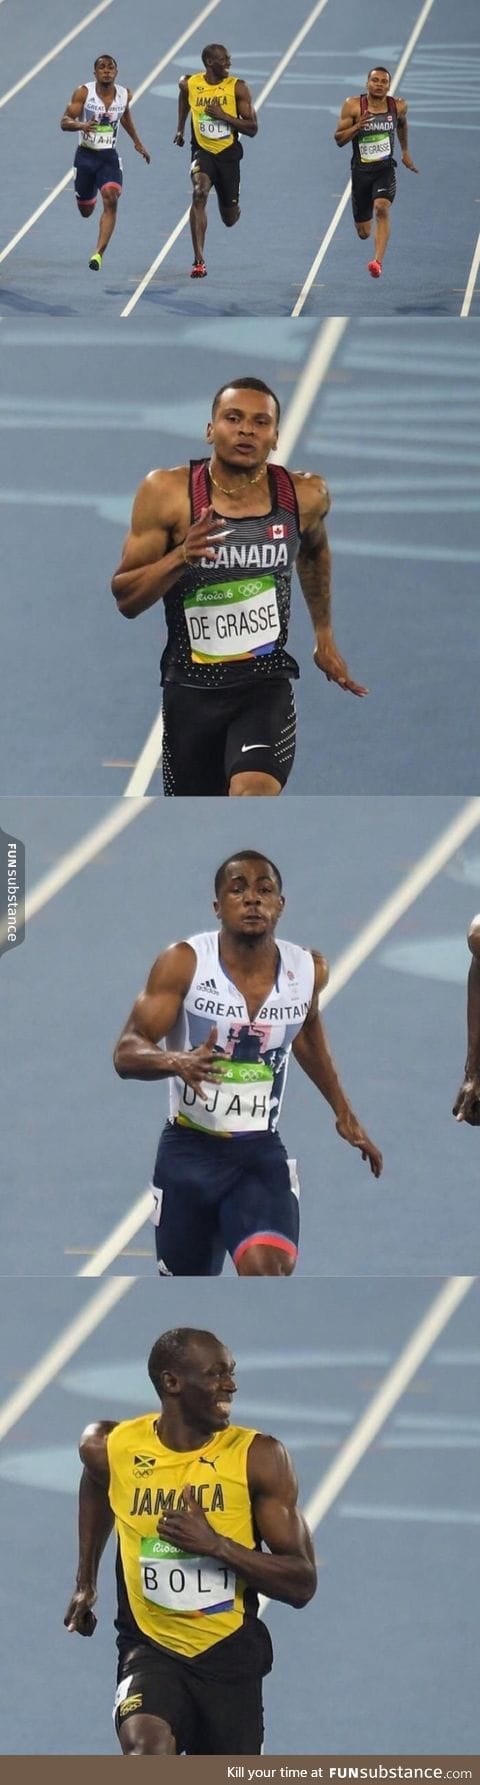 These two dudes spitting out pieces of lungs while Bolt poses for photos